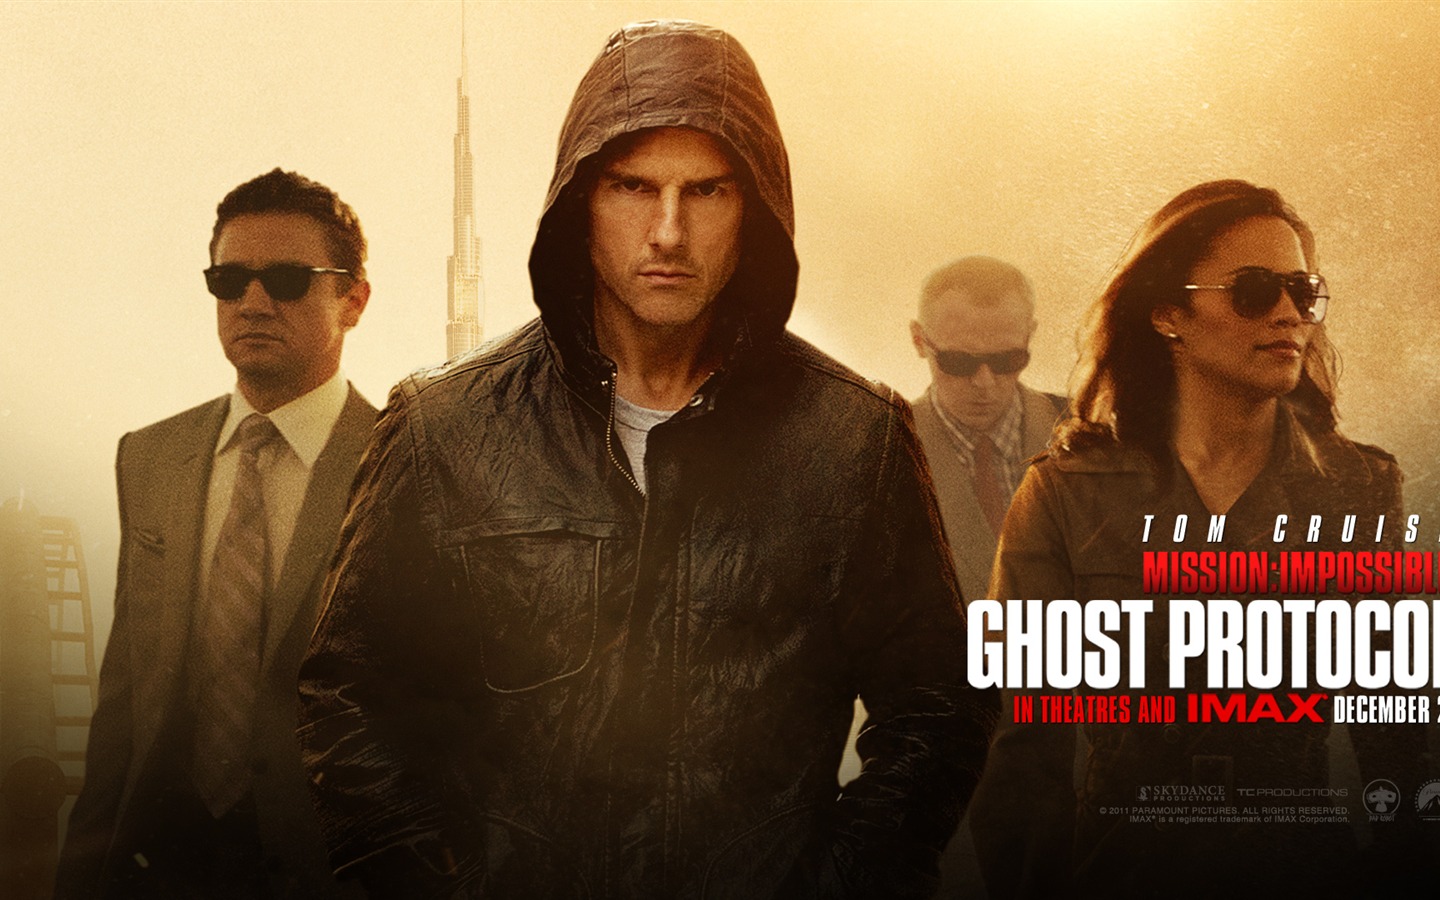 Mission: Impossible - Ghost Protocol 碟中谍4 高清壁纸1 - 1440x900